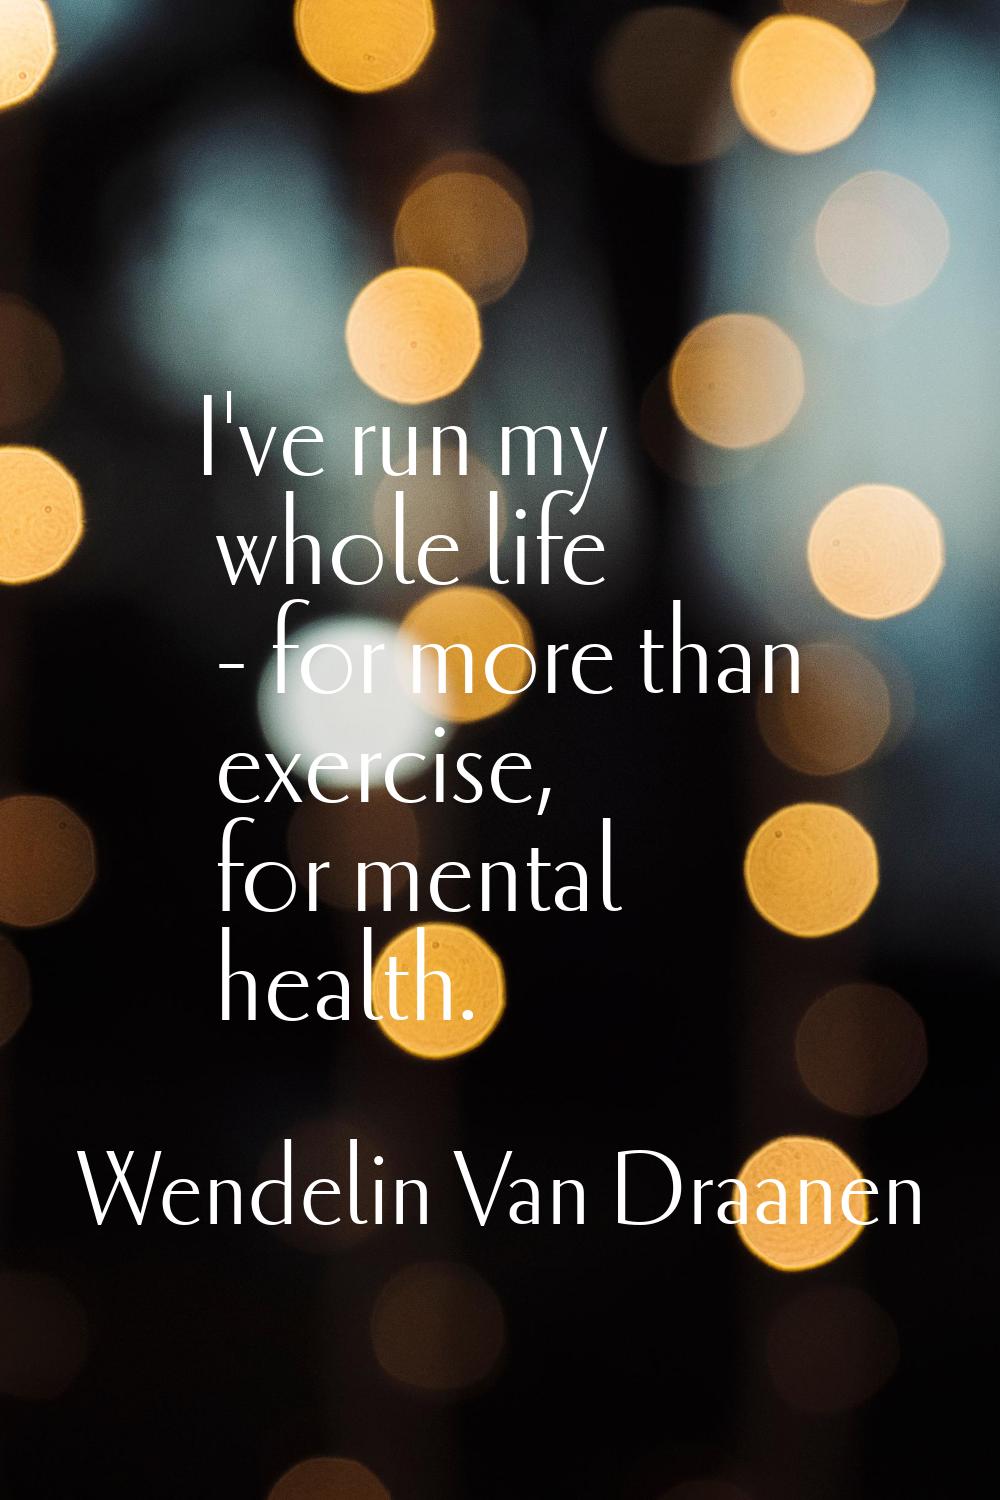 I've run my whole life - for more than exercise, for mental health.